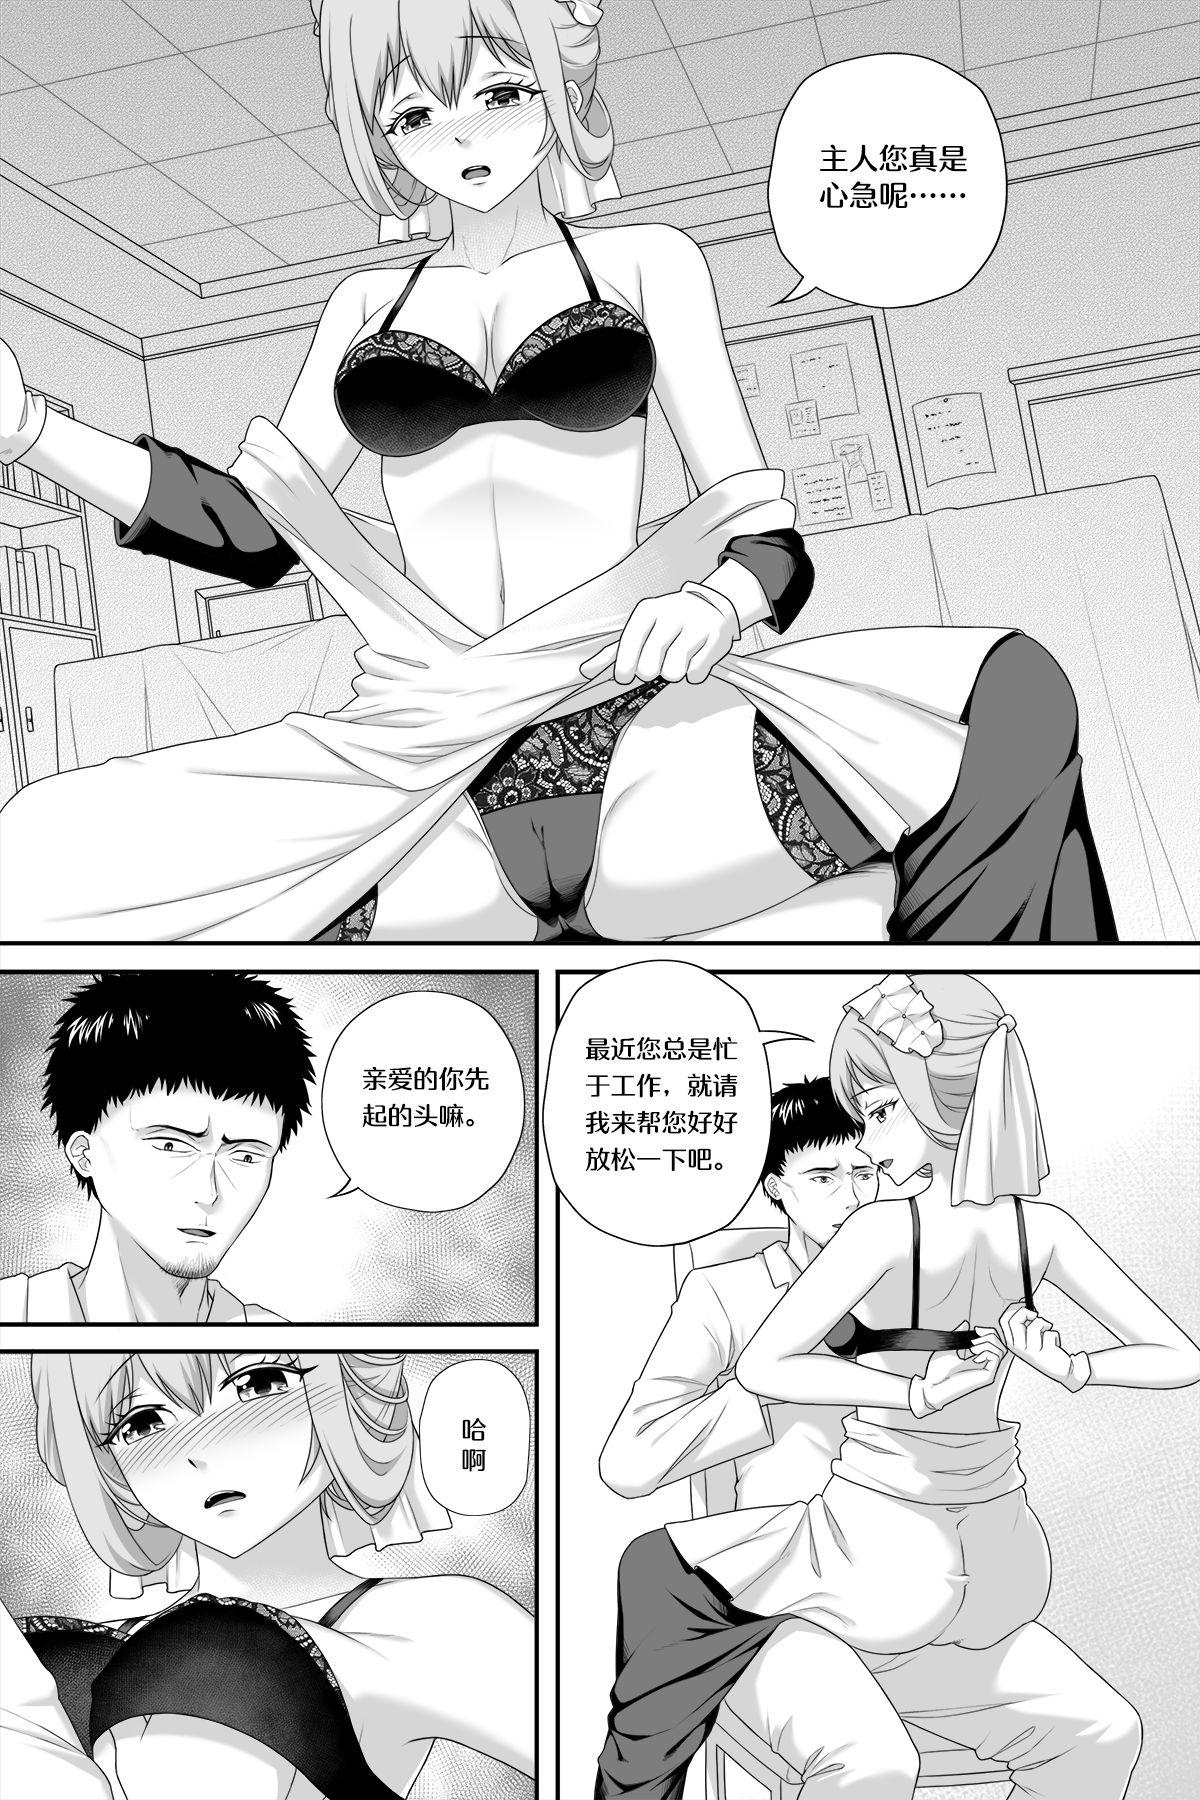 Watersports 花女仆的侍奉 - Warship girls Fist - Page 4